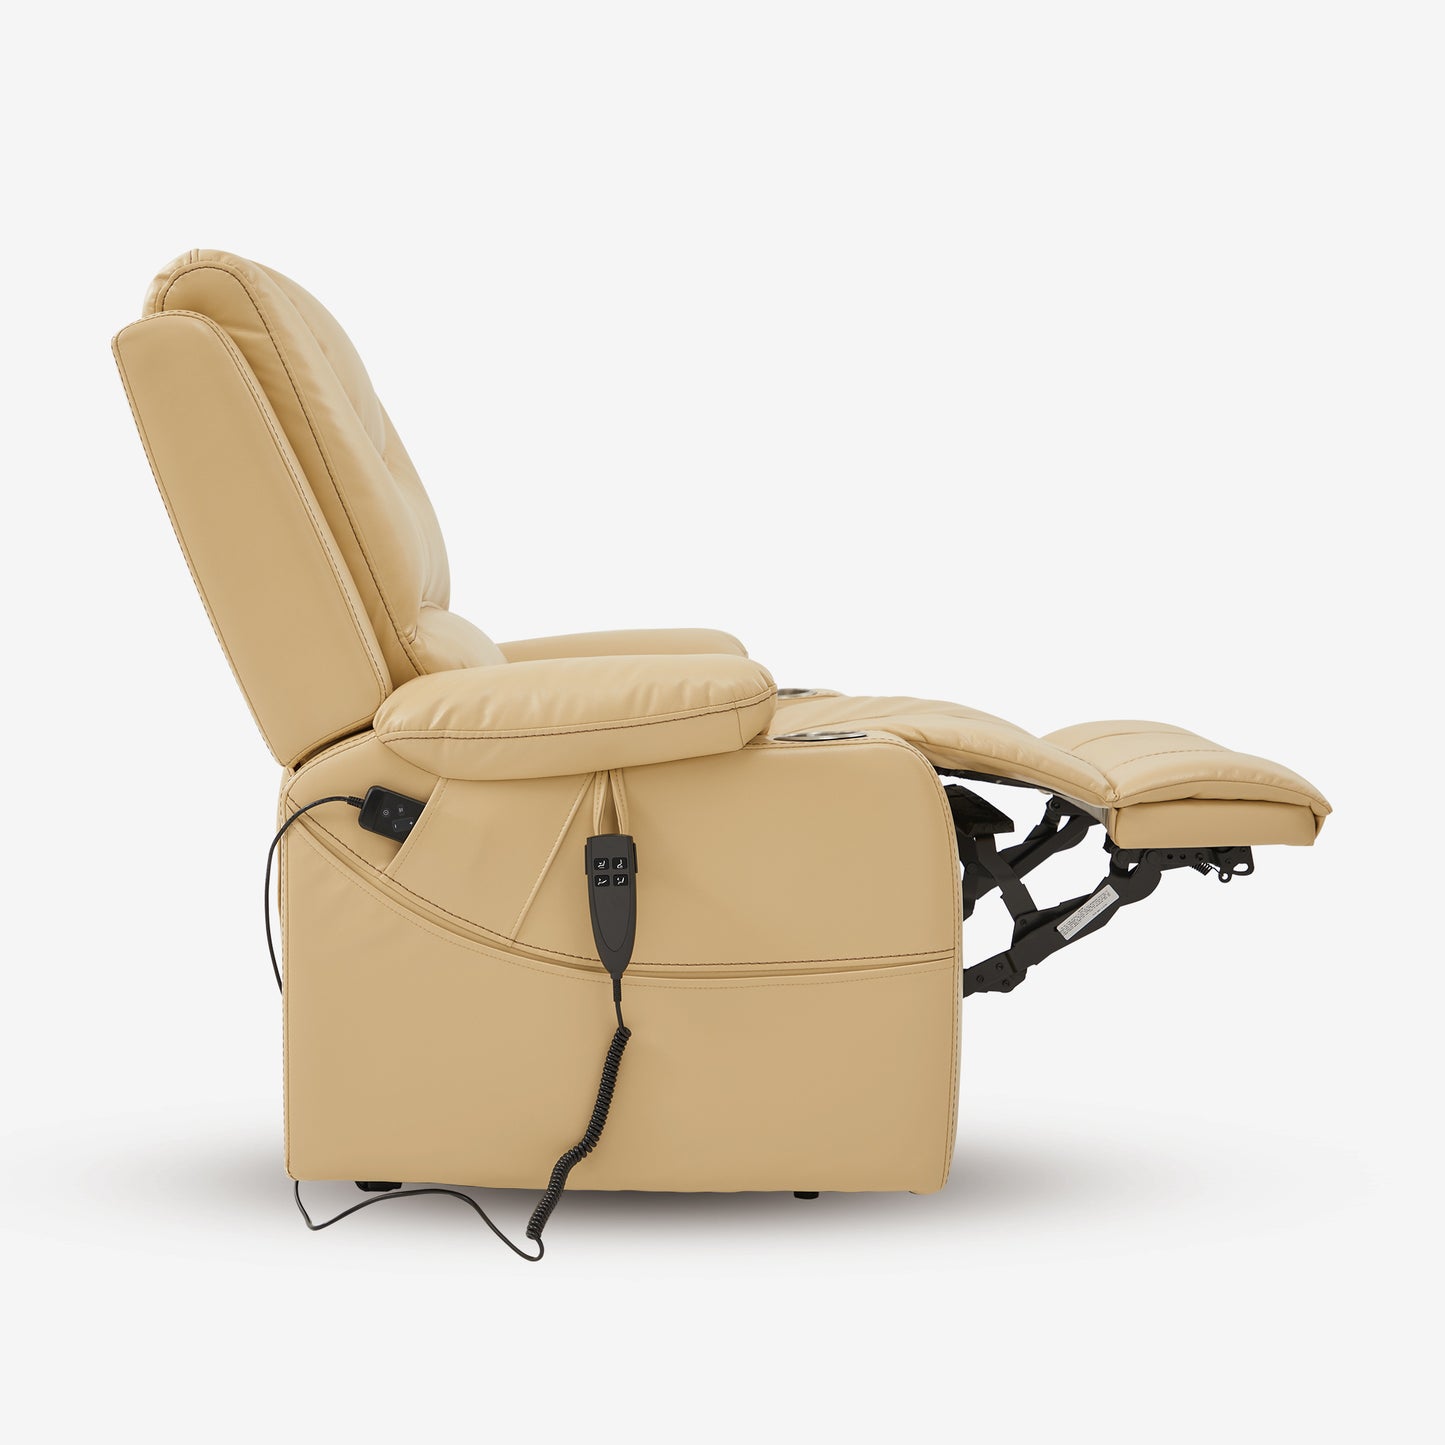 Lay Flat Sleeper Recliner With Heating Massage And Cup Holder